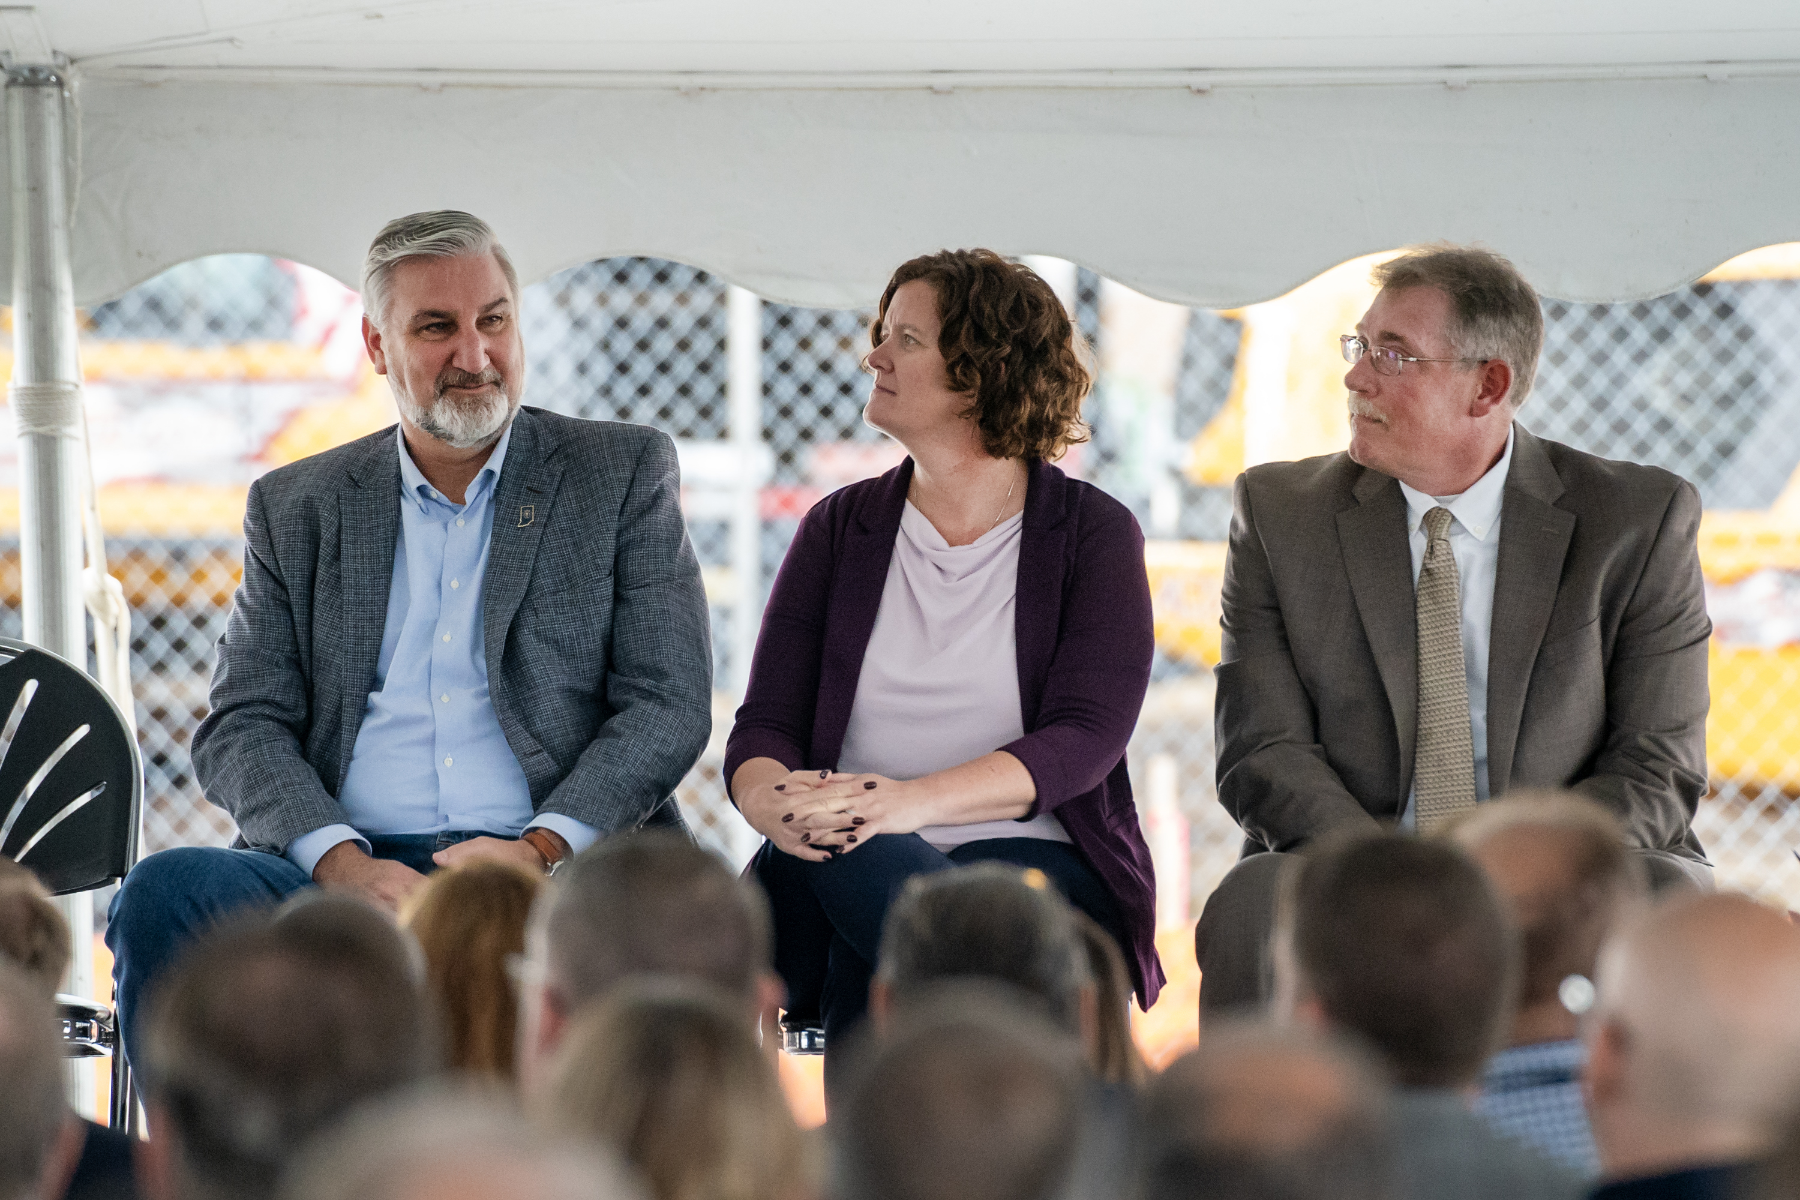 Governor Eric Holcomb, IDOC Commissioner Christina Reagle and Executive Director of Construction Services Kevin Orme listen to a speaker on Thursday, Sep. 28, 2023 during a groundbreaking for the new $1.2 Billion correctional facility under construction in Westville, Indiana. SCOTT ROBERSON | Indiana Department of Correction